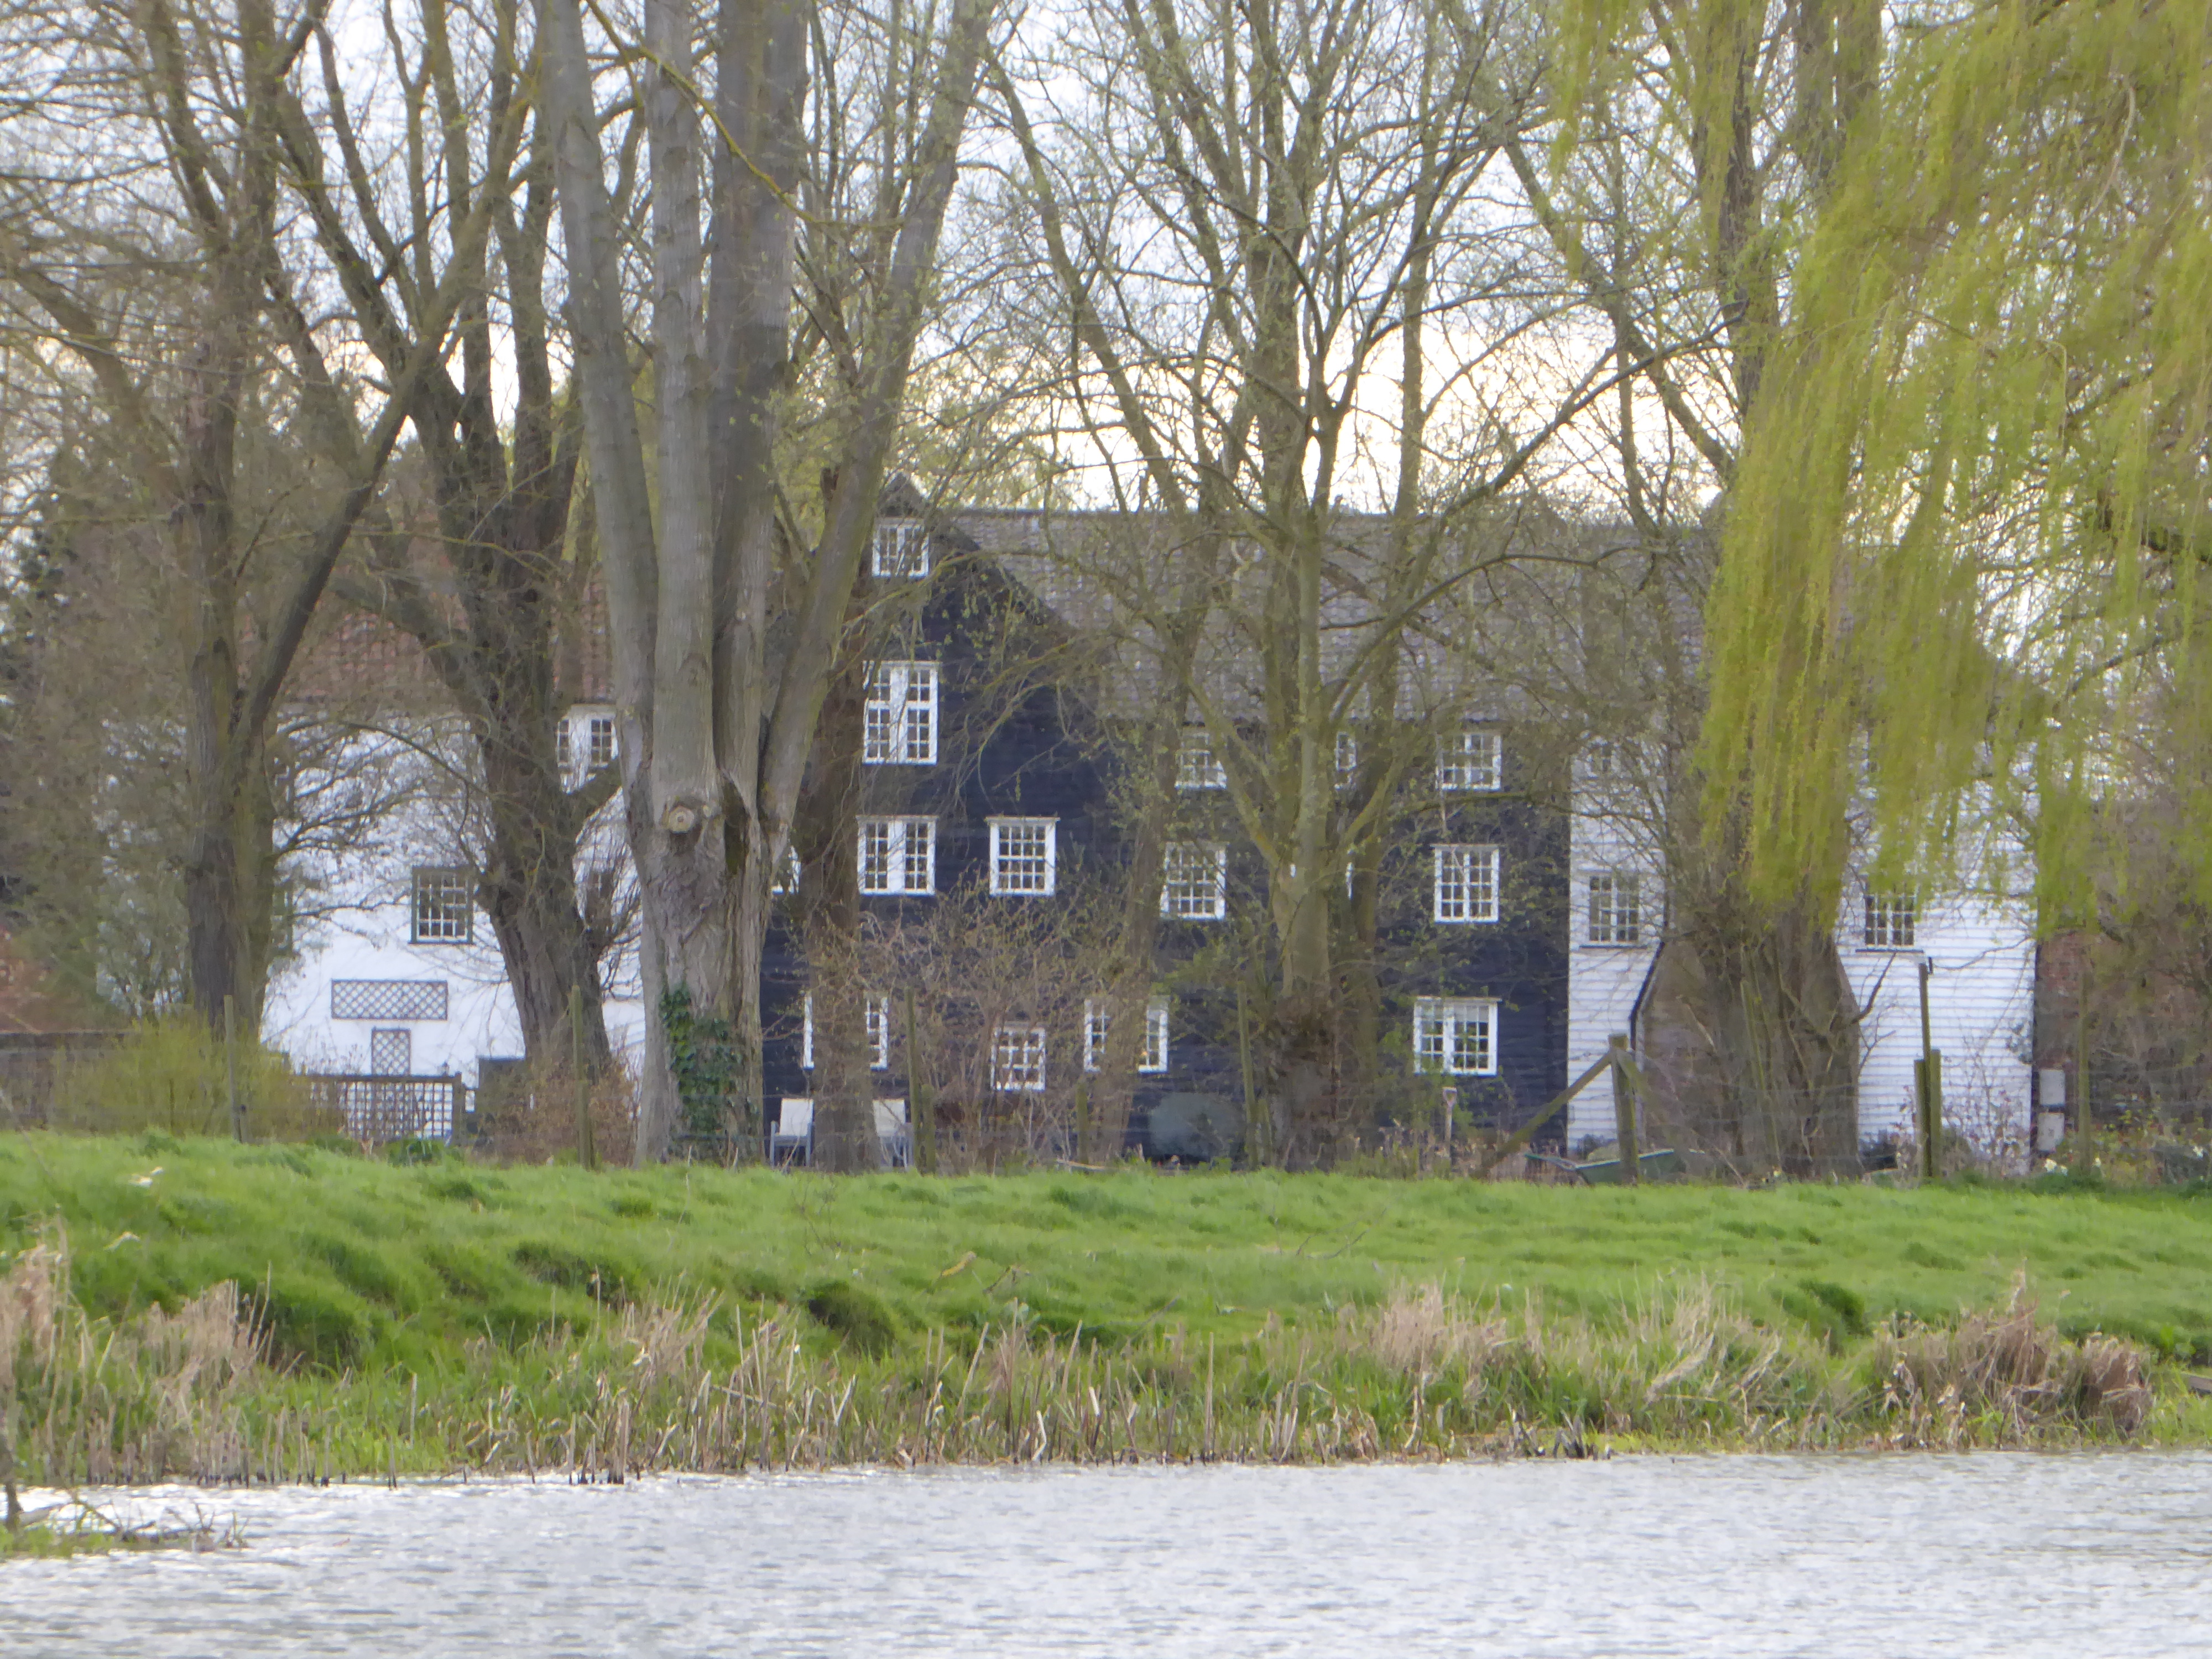 Mendham Mill from the water